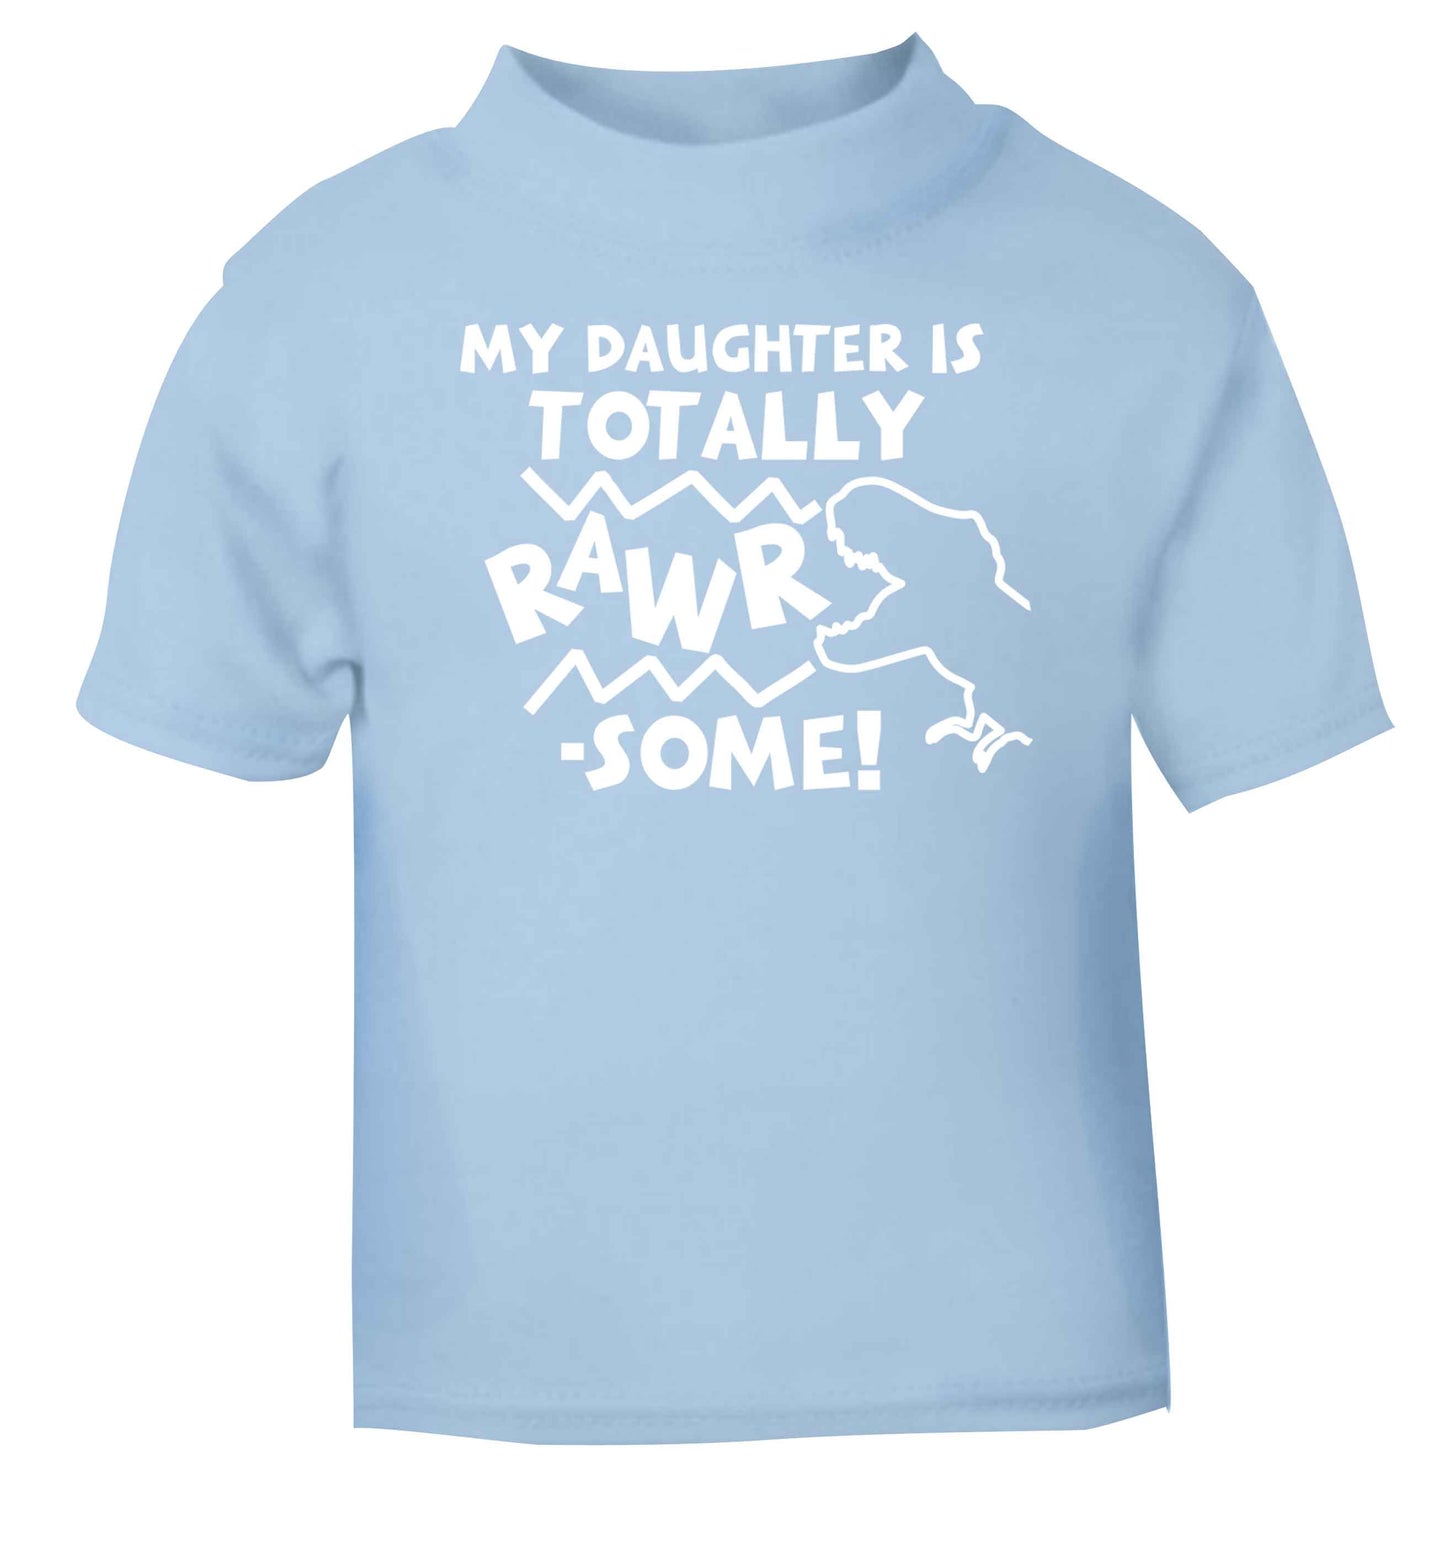 My daughter is totally rawrsome light blue baby toddler Tshirt 2 Years